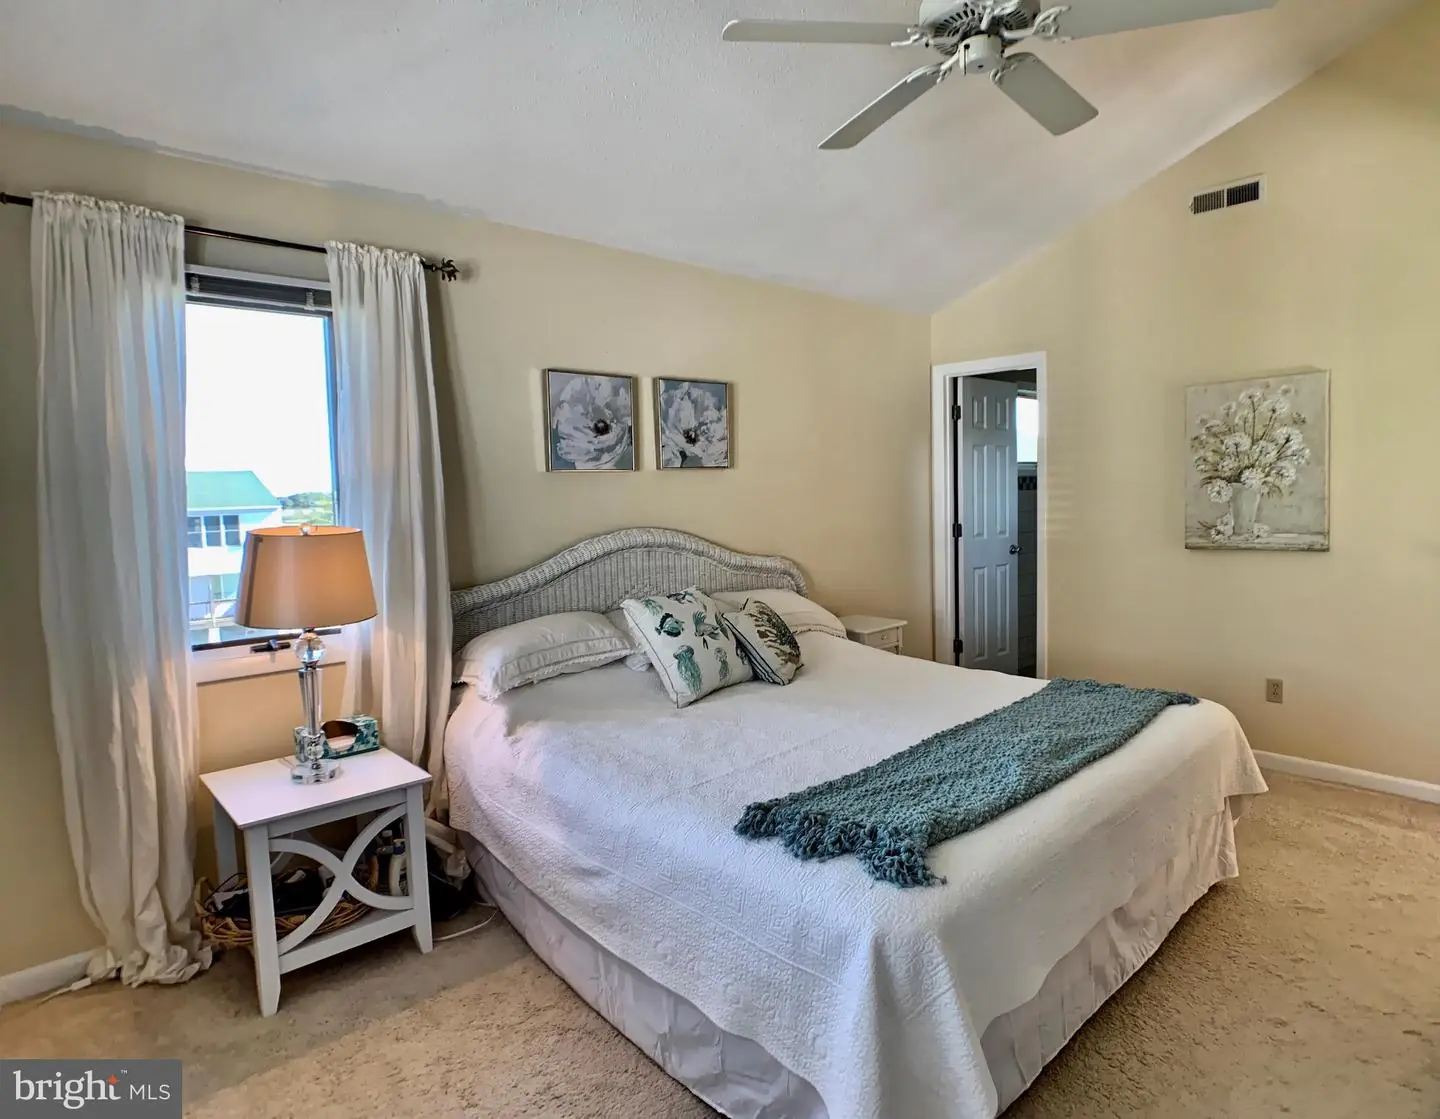 DESU164670-304207560319-2021-07-17-02-03-15 35199 Hassell Ave | Bethany Beach, DE Real Estate For Sale | MLS# Desu164670  - 1st Choice Properties